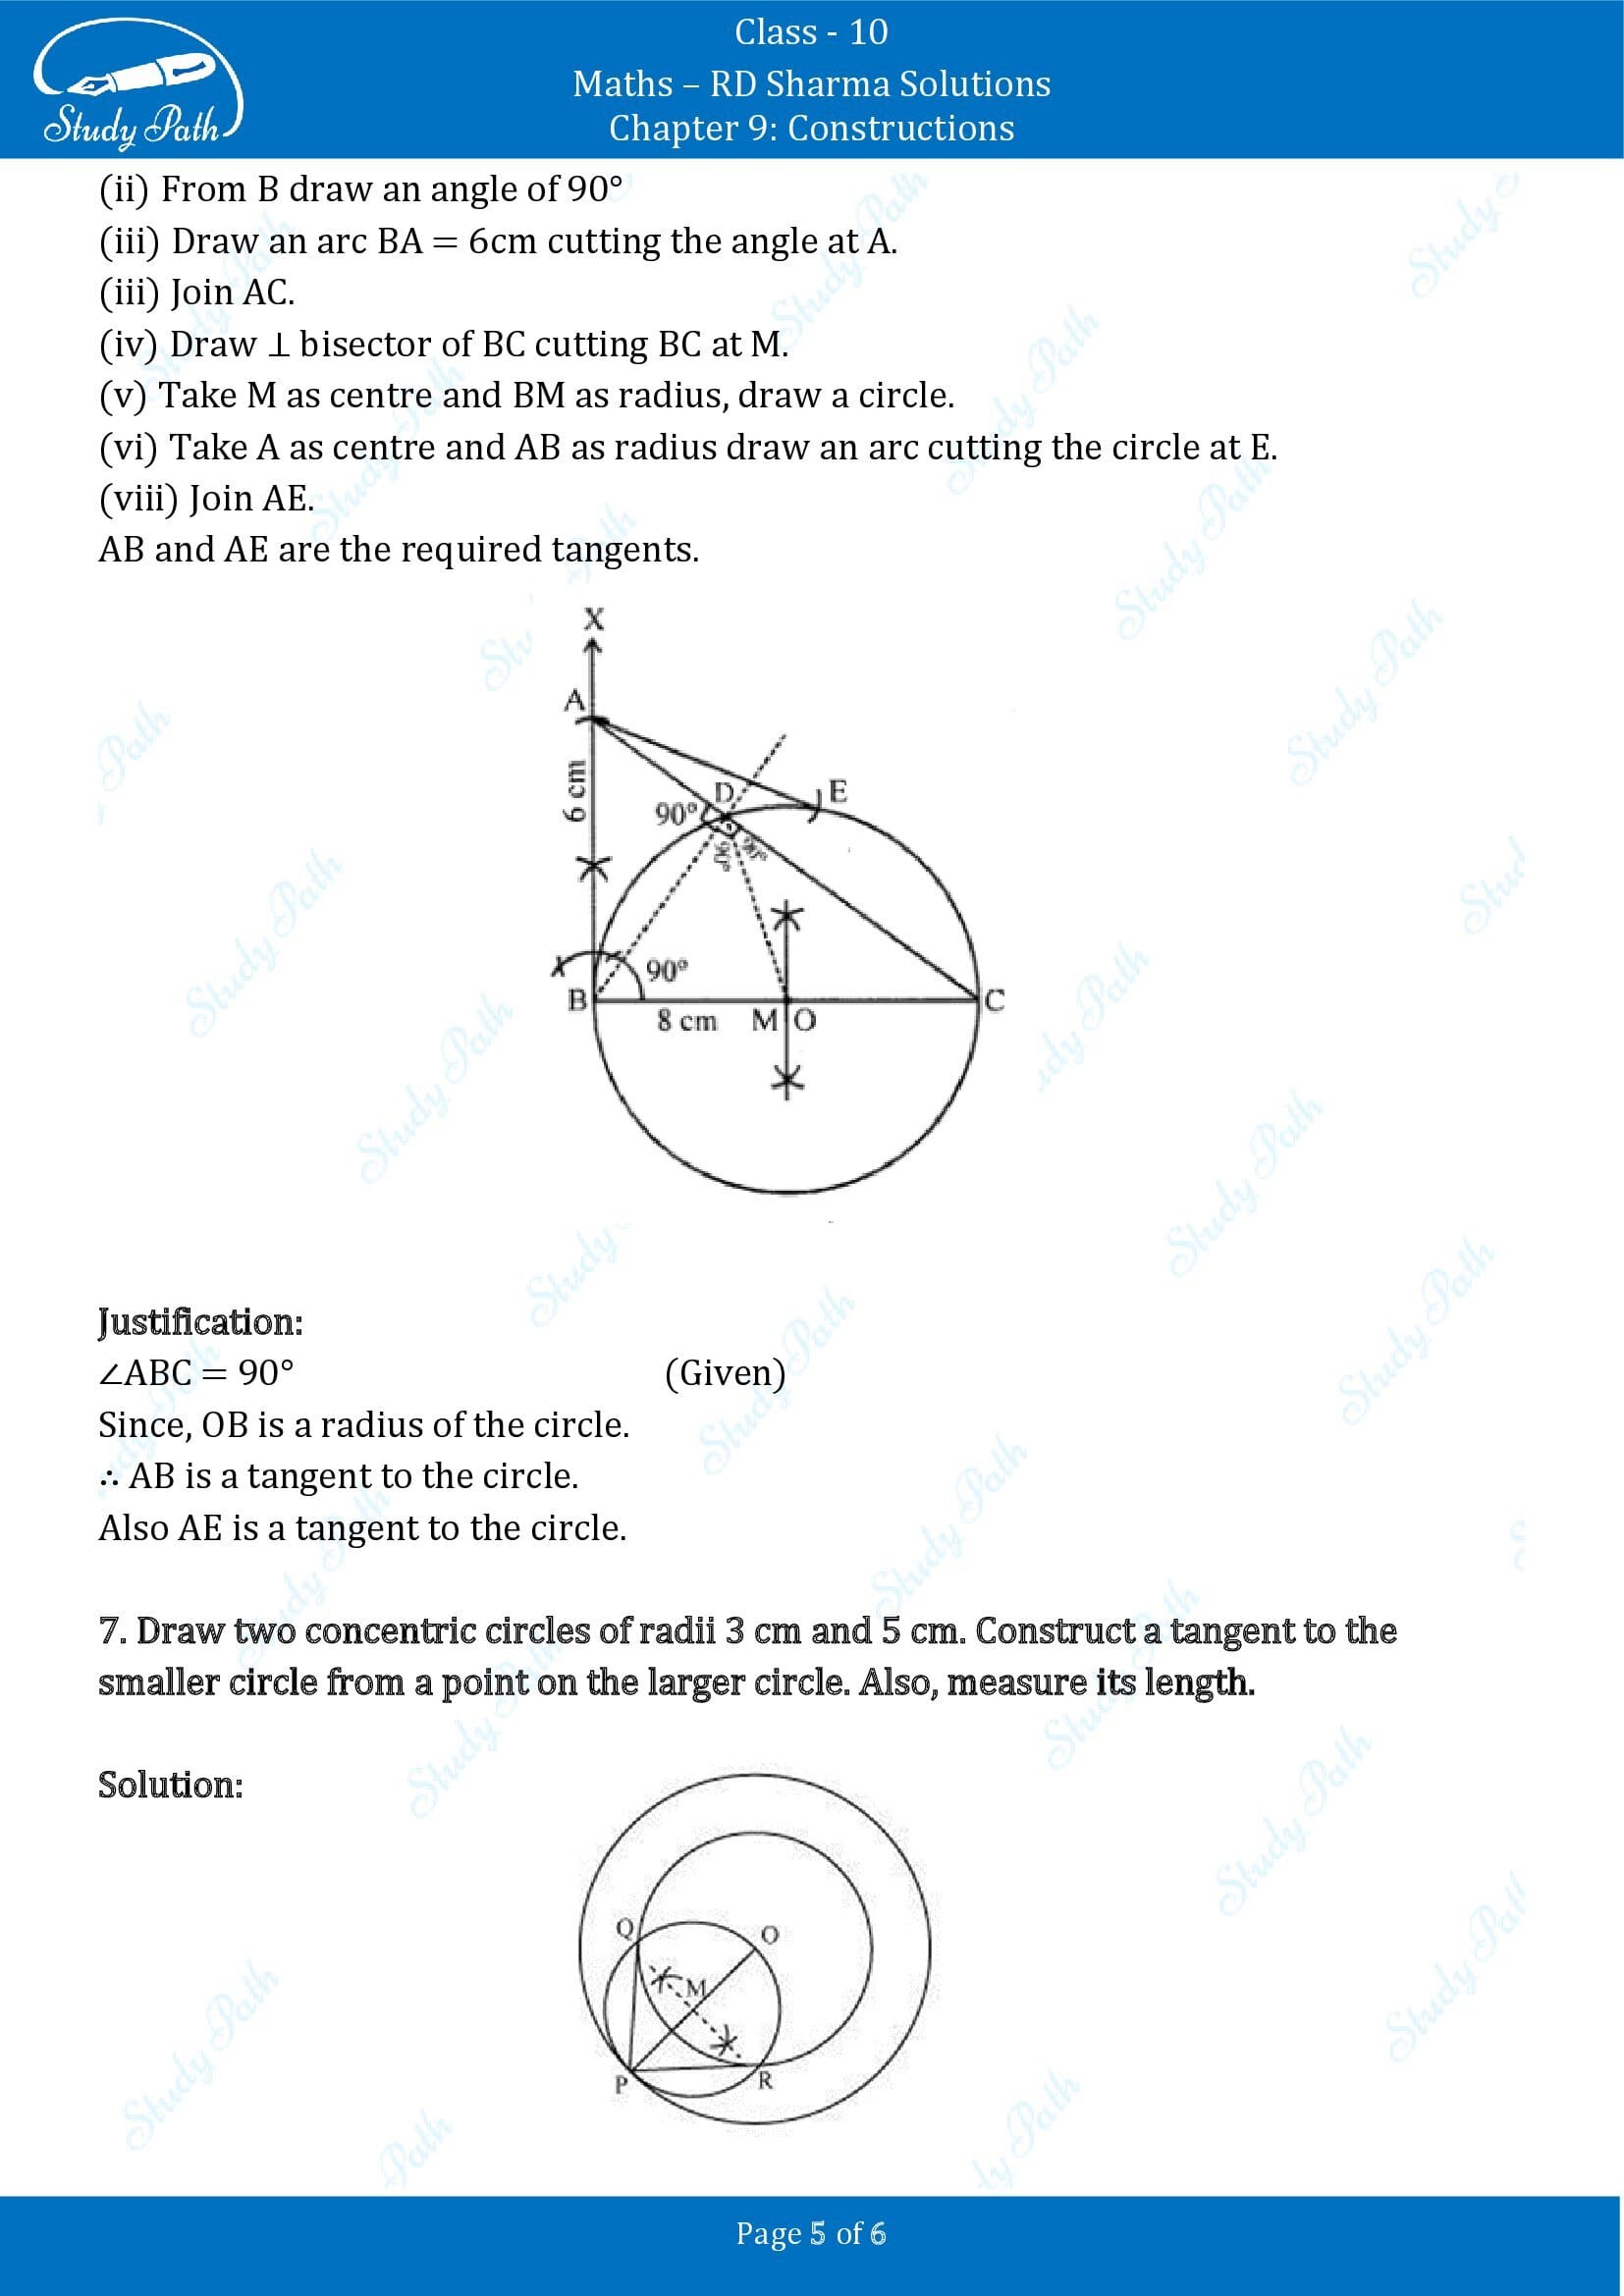 RD Sharma Solutions Class 10 Chapter 9 Constructions Exercise 9.3 00005